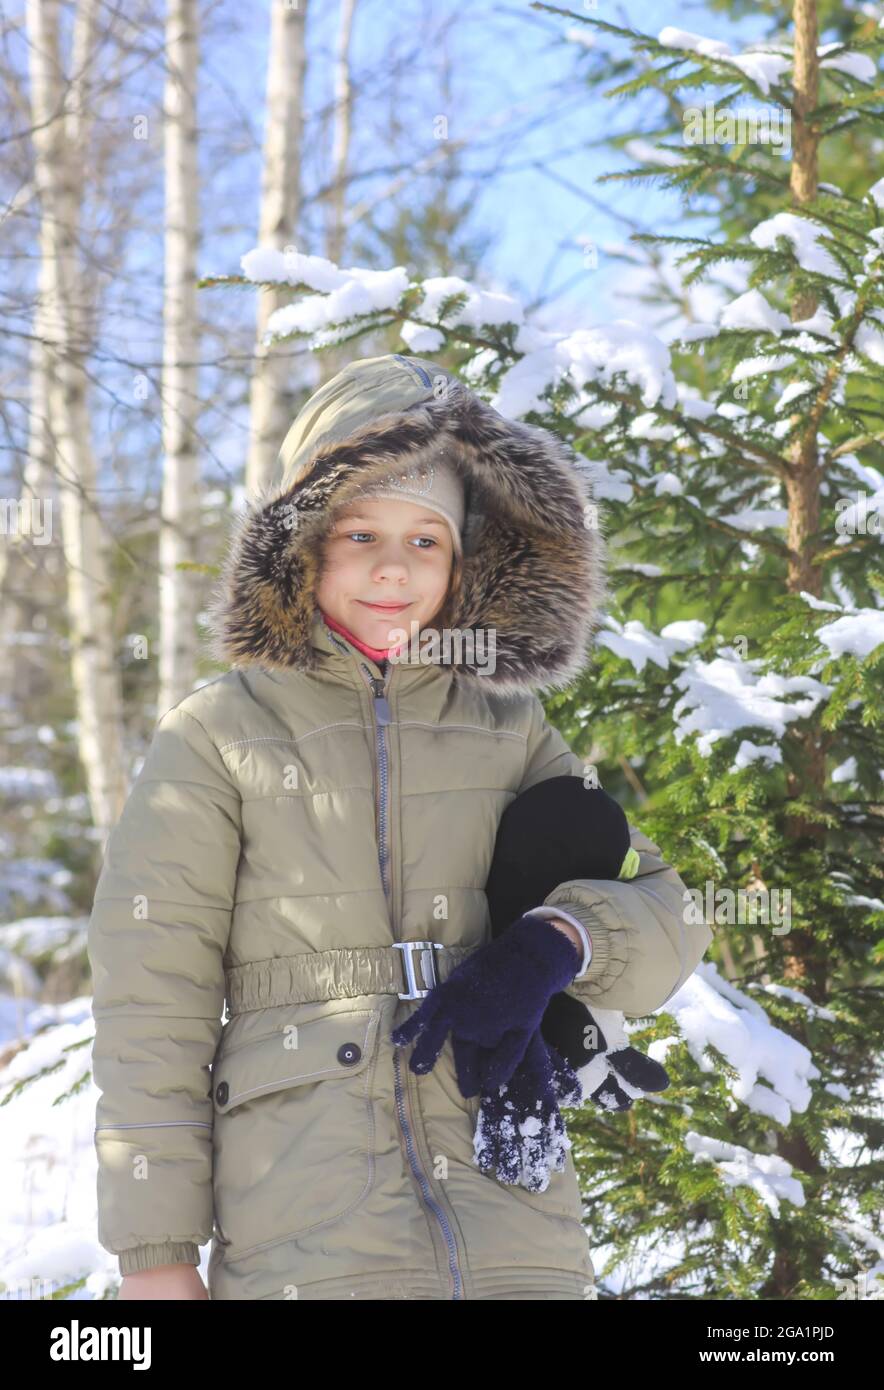 Little girl walking in snow-covered winter forest. Child exploring nature. Stock Photo